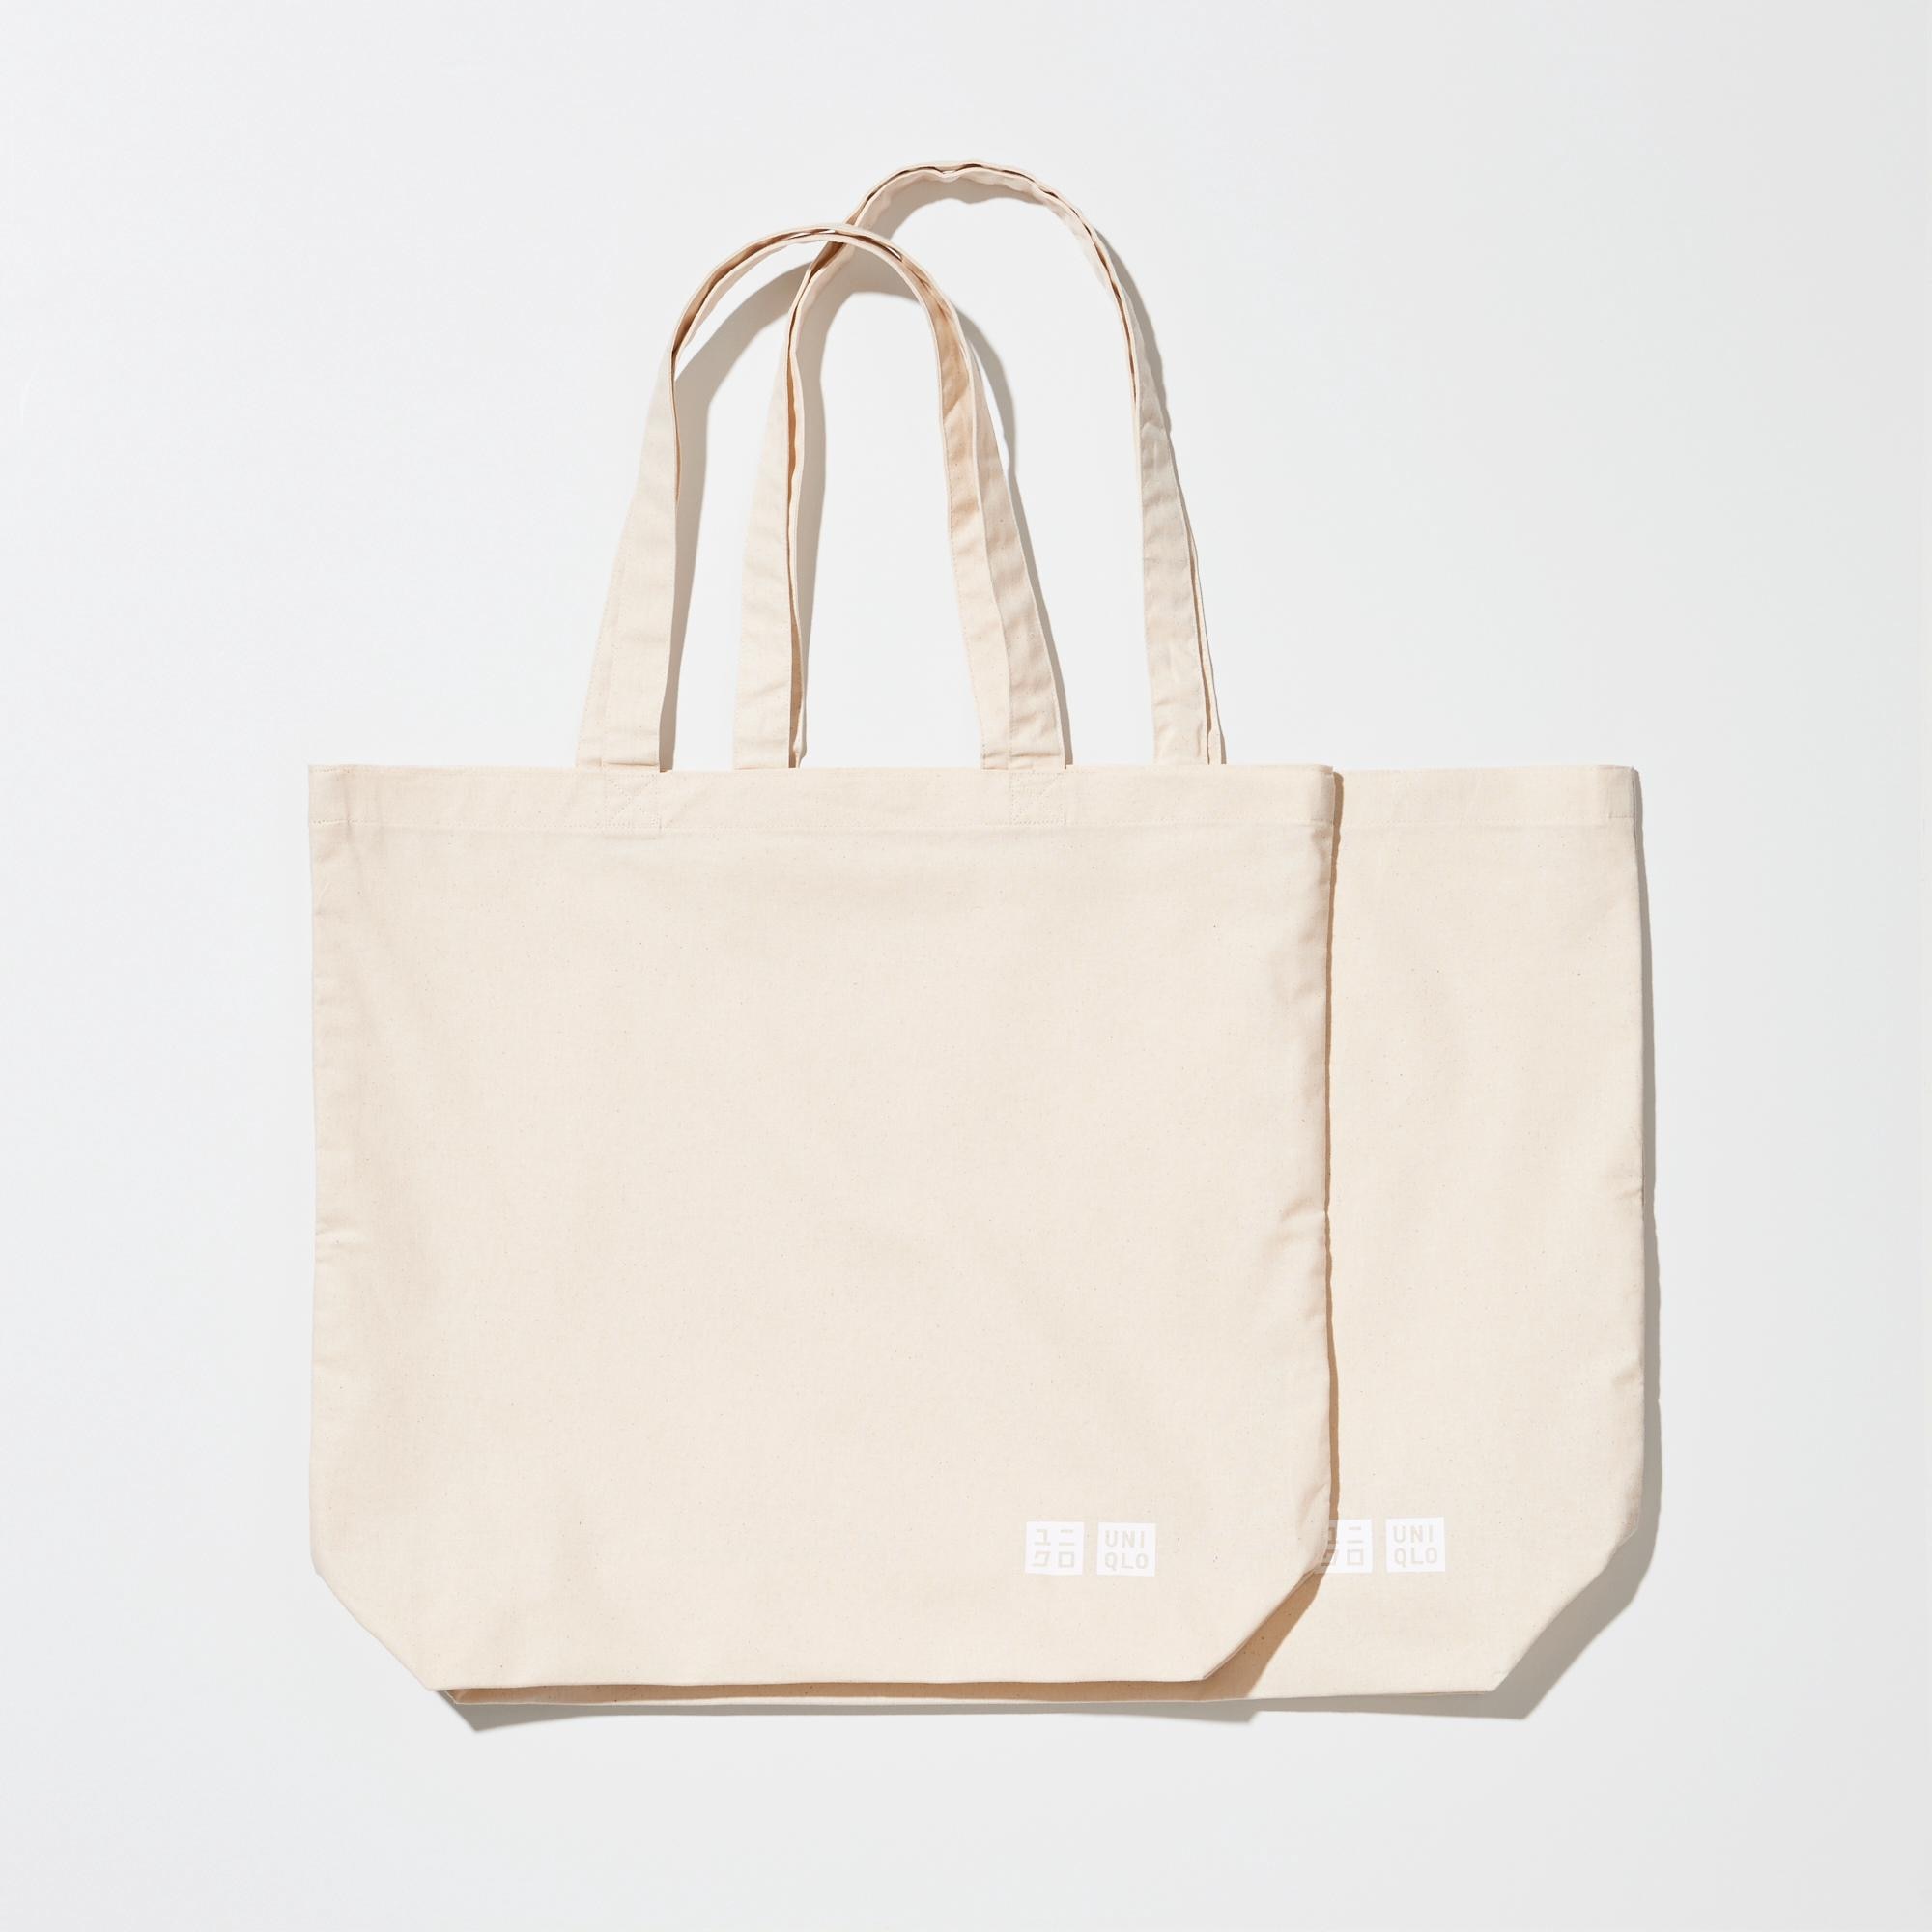 Uniqlo Philippines  Join UNIQLO in our shift towards eco friendly and  reusable bags To reduce singleuse paper bag consumption we will start  charging 2 per paper bag starting September 5 2022